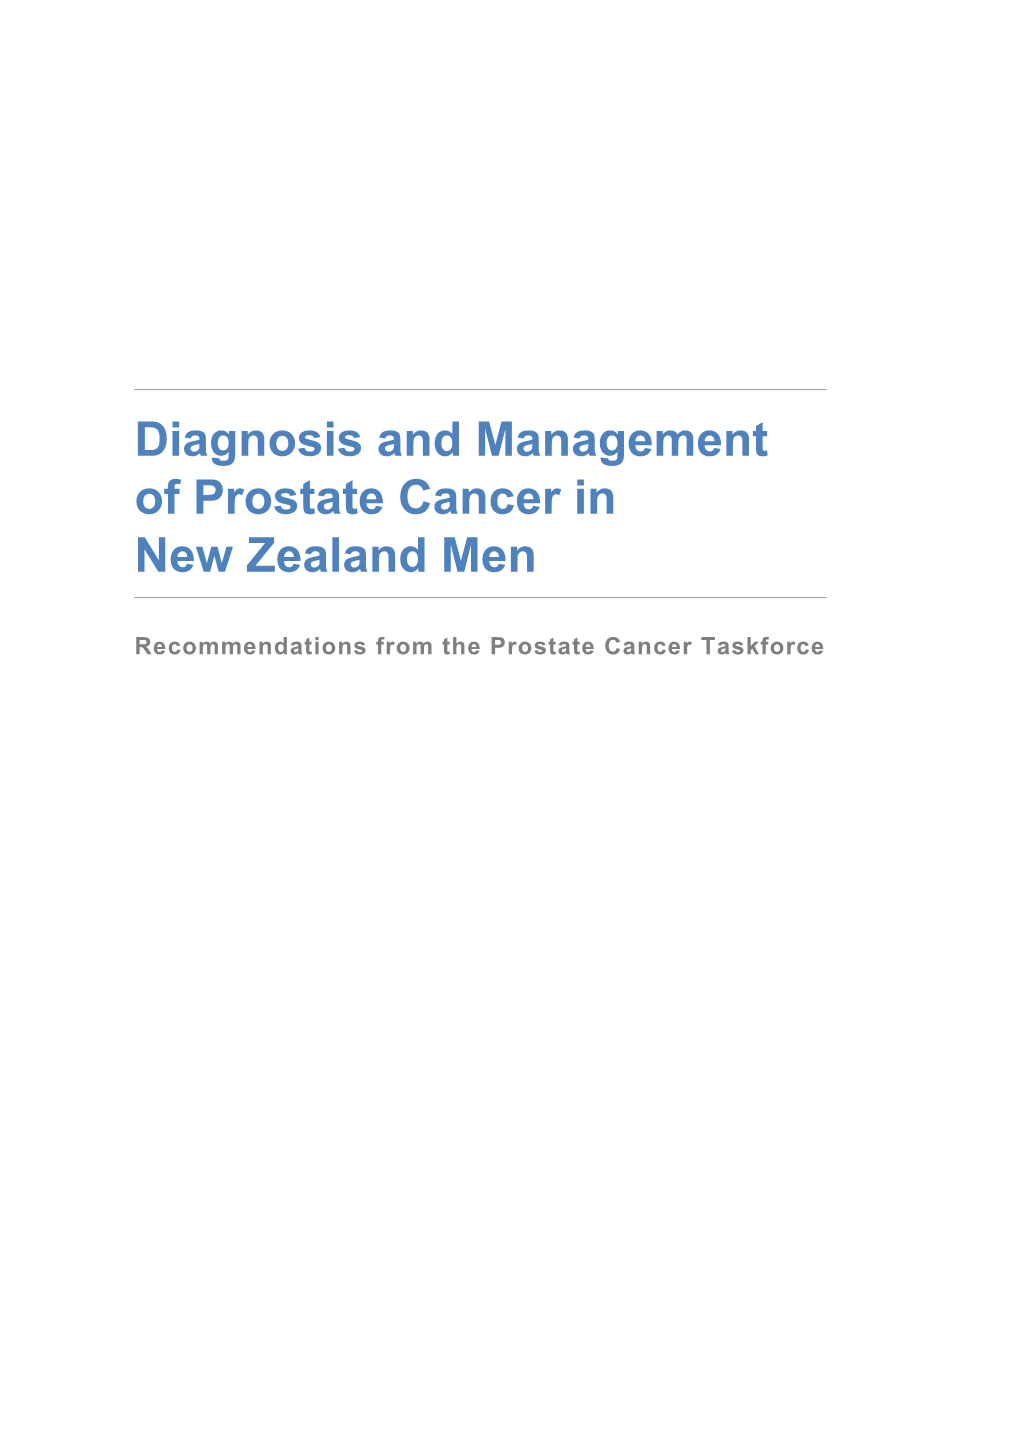 Diagnosis and Management of Prostate Cancer in Newzealand Men